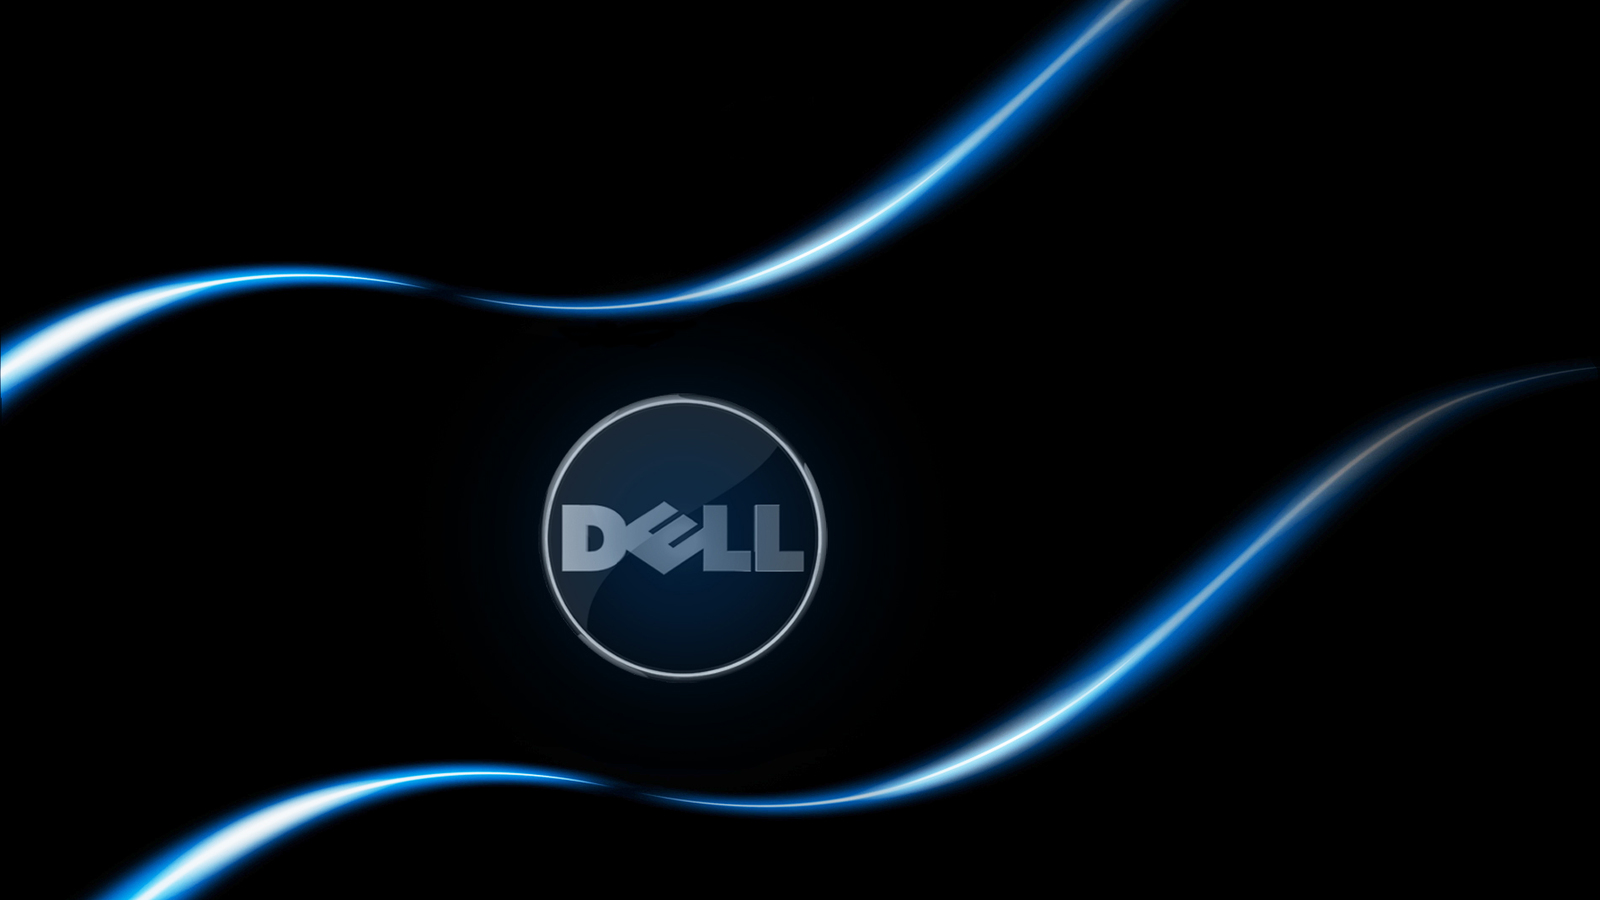 HD Wallpaper Dell For Laptop